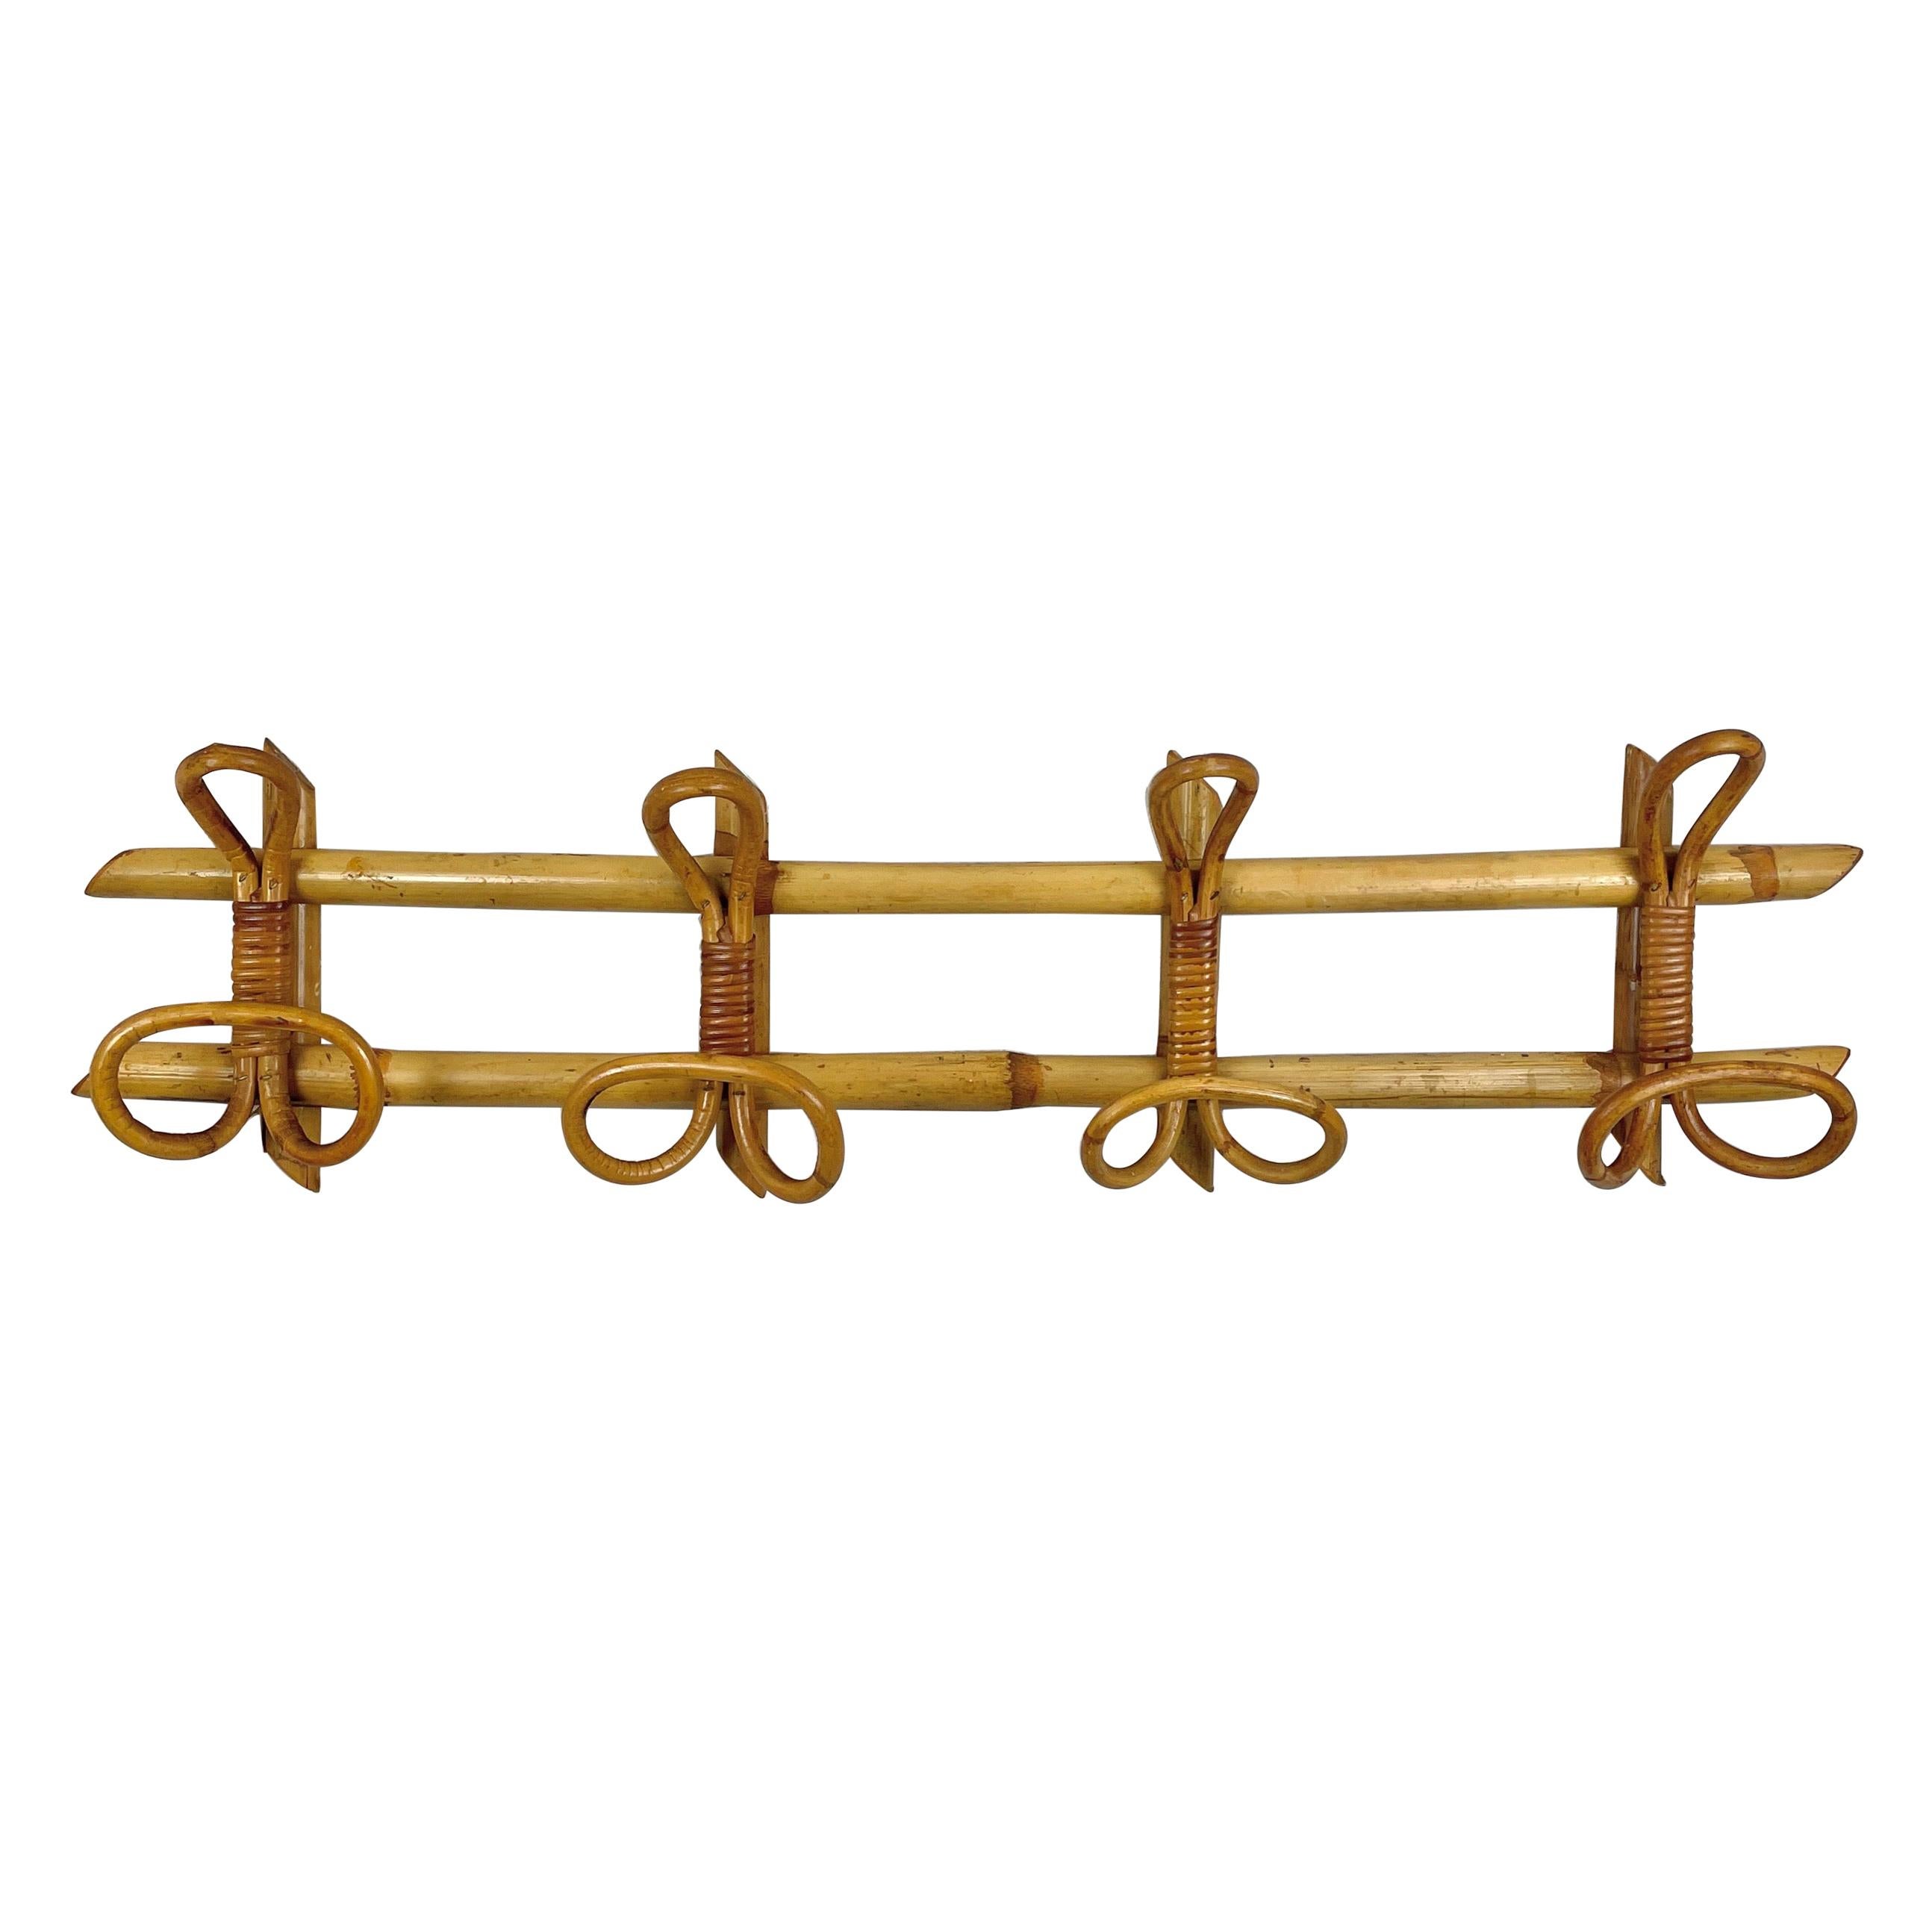 Midcentury French Riviera Rattan and Bamboo Canes Italian Coat Hanger Rack 1960s